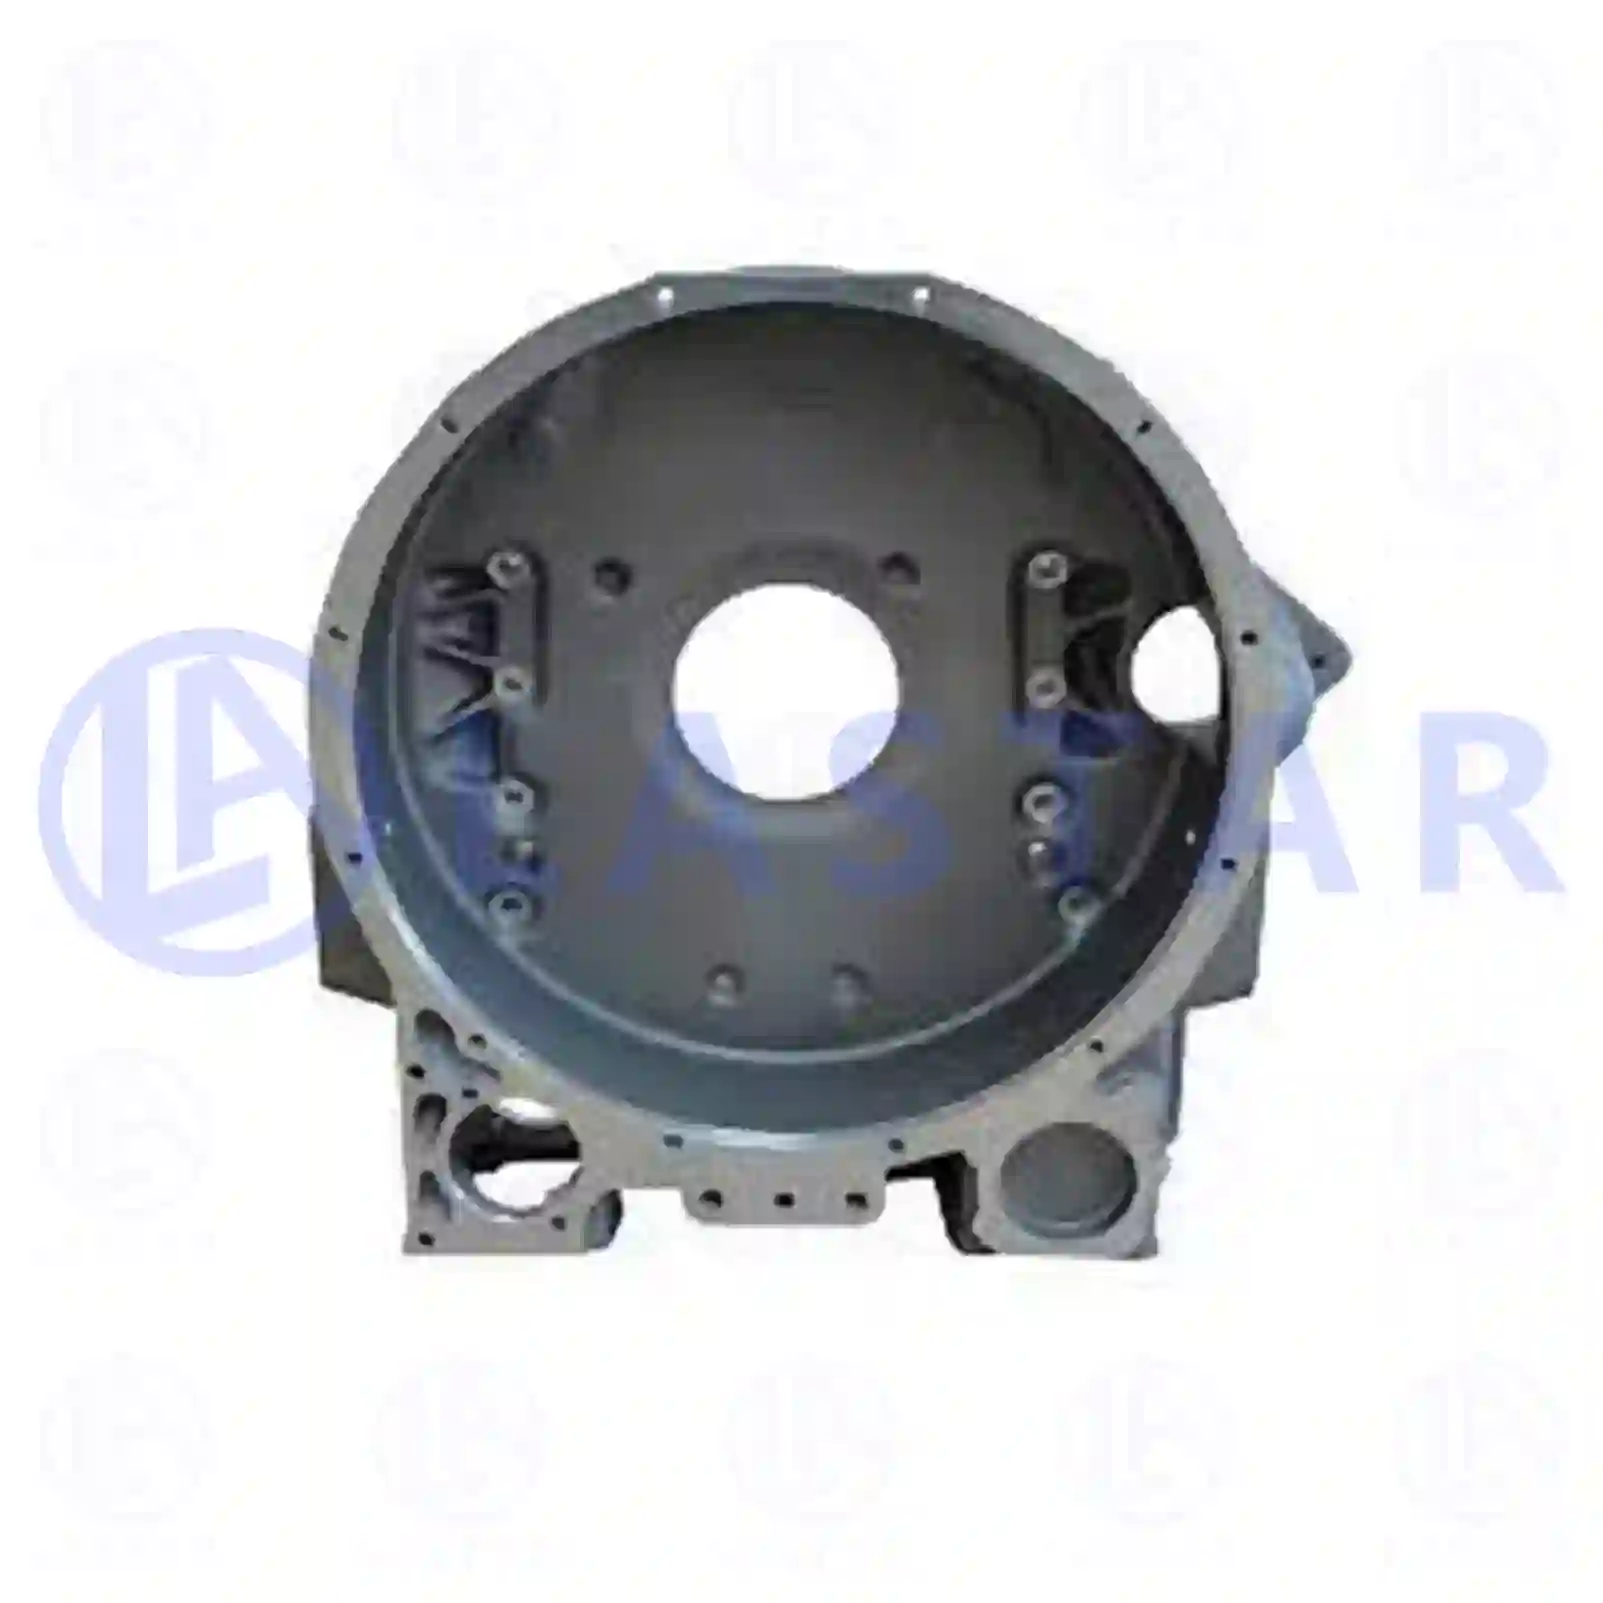 Timing case, 77701901, 4230100133 ||  77701901 Lastar Spare Part | Truck Spare Parts, Auotomotive Spare Parts Timing case, 77701901, 4230100133 ||  77701901 Lastar Spare Part | Truck Spare Parts, Auotomotive Spare Parts